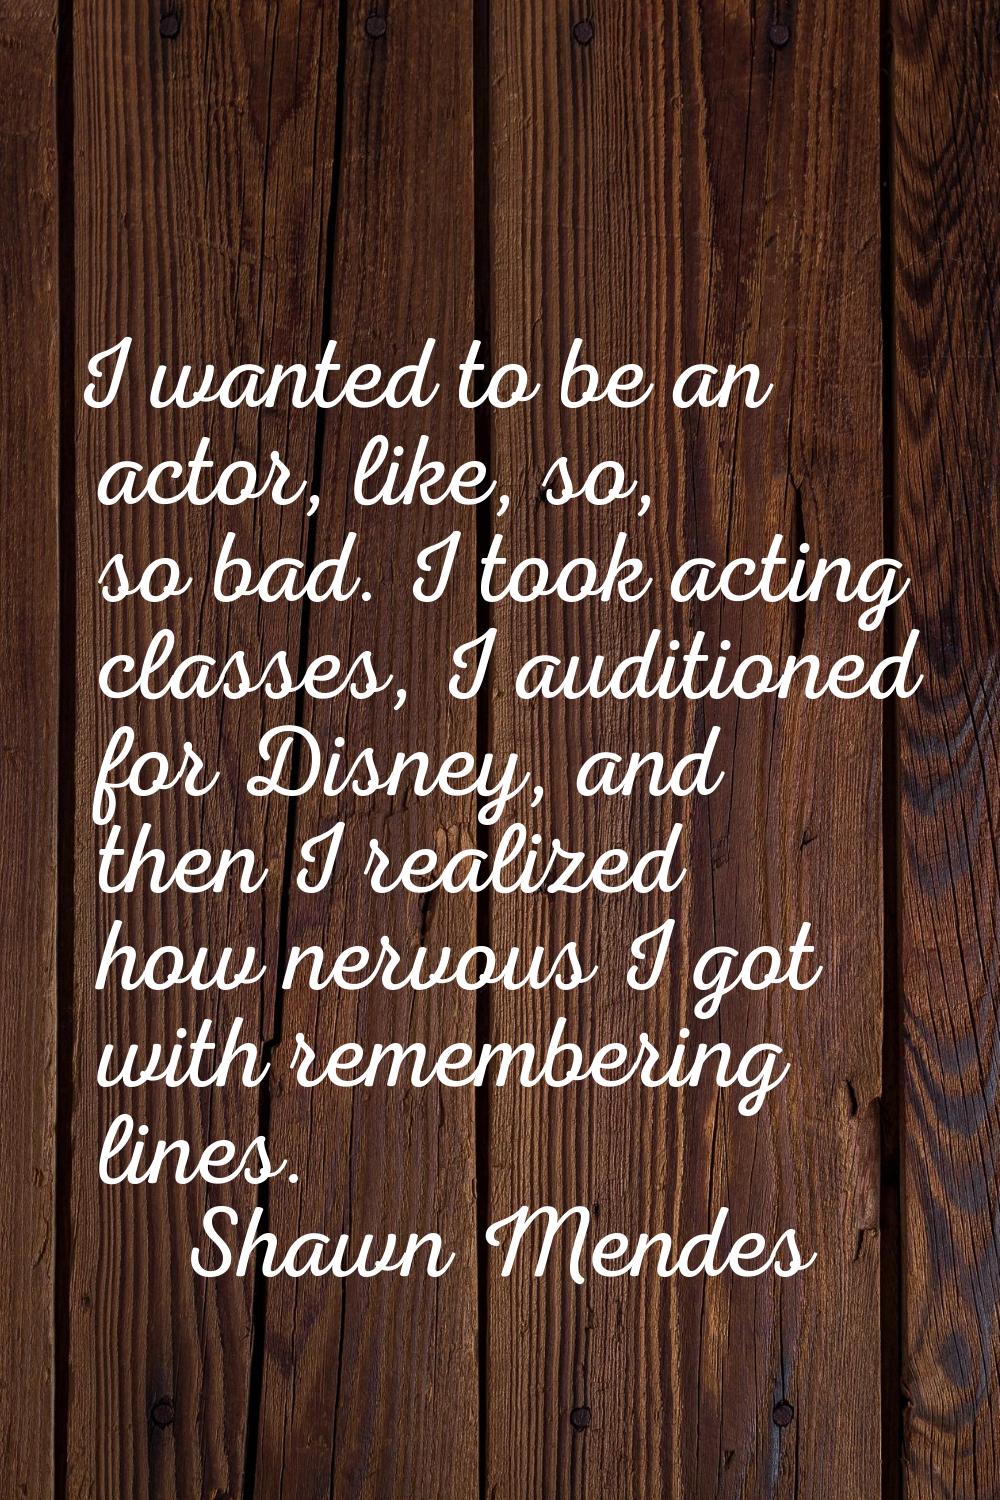 I wanted to be an actor, like, so, so bad. I took acting classes, I auditioned for Disney, and then